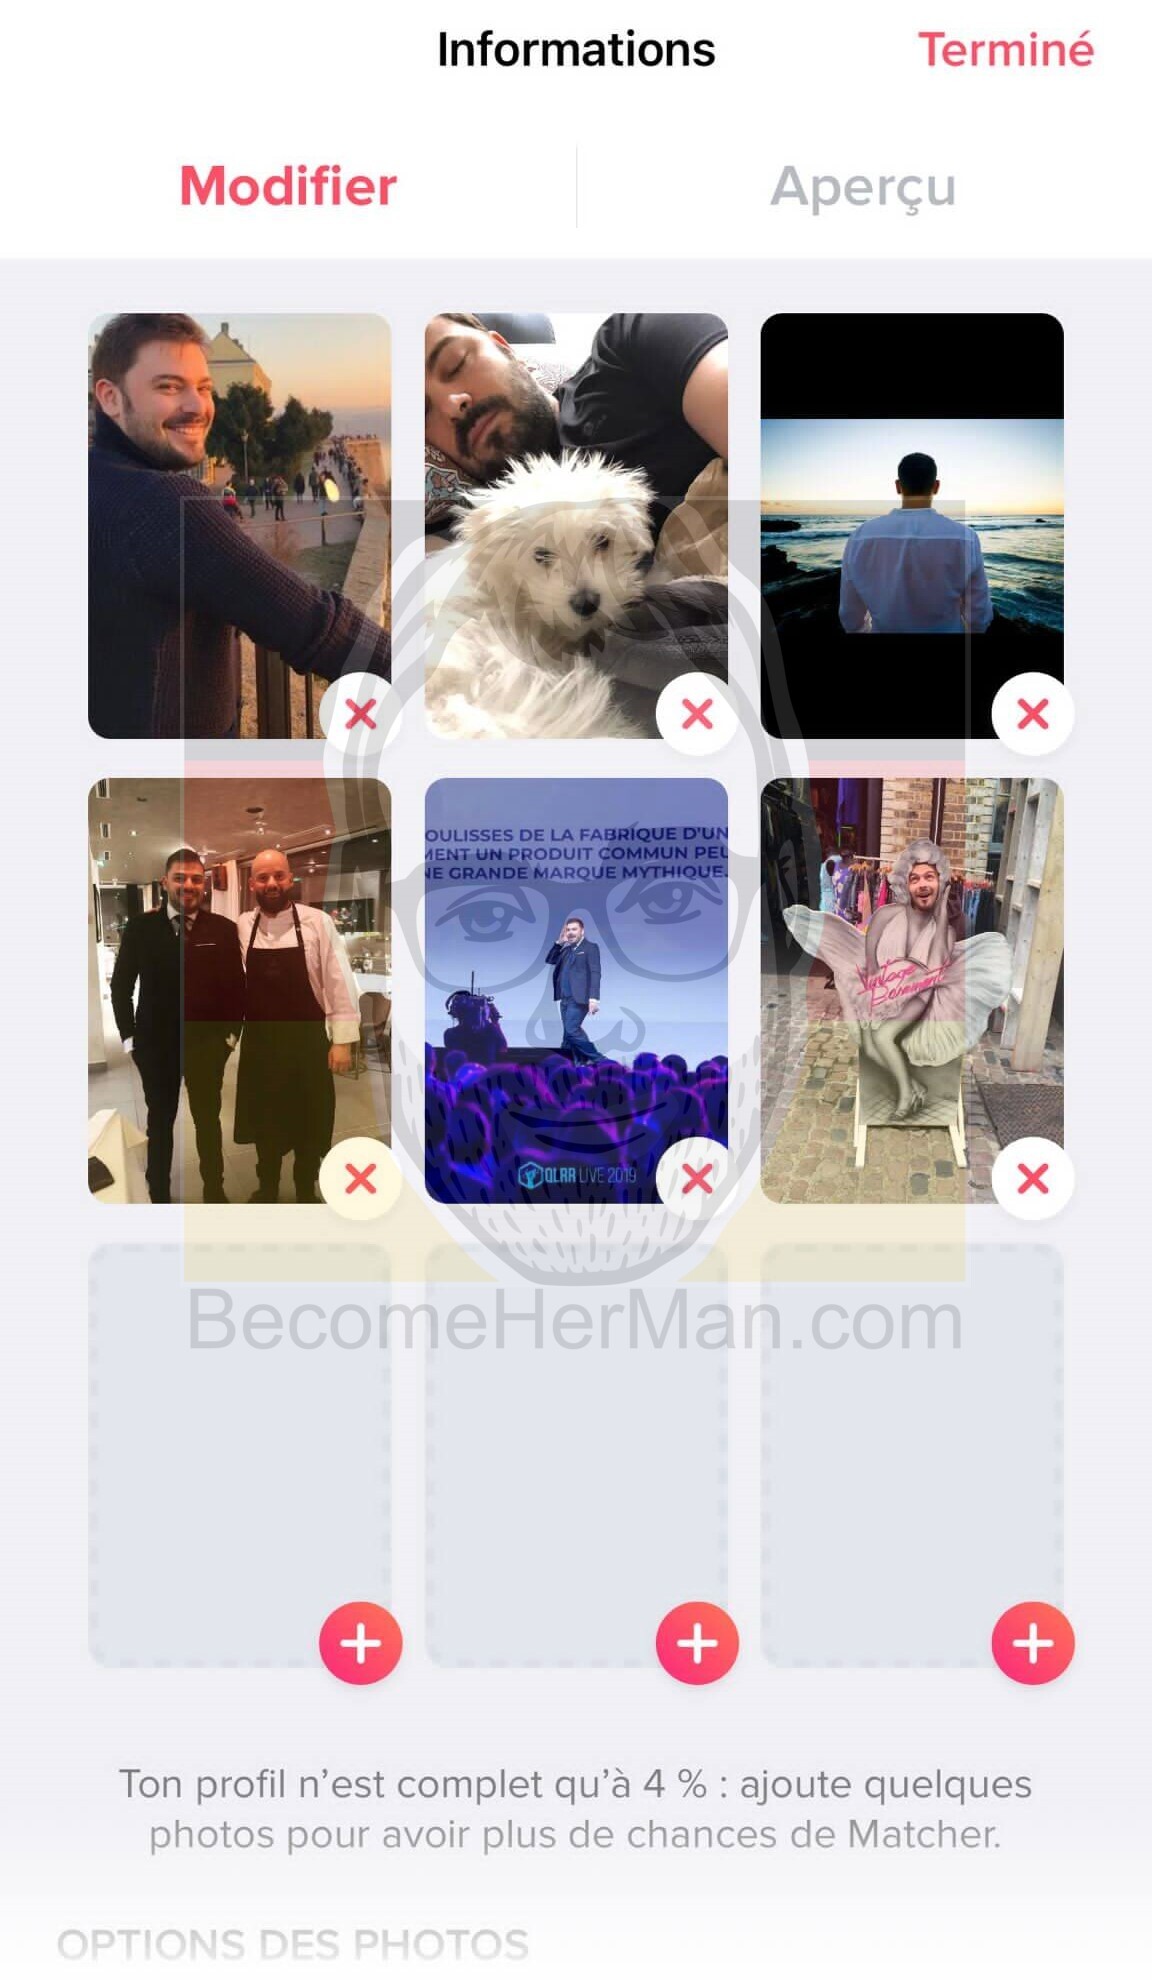 9 Foolproof steps to get dates on Tinder in 2023 – 2. Grab her attention 